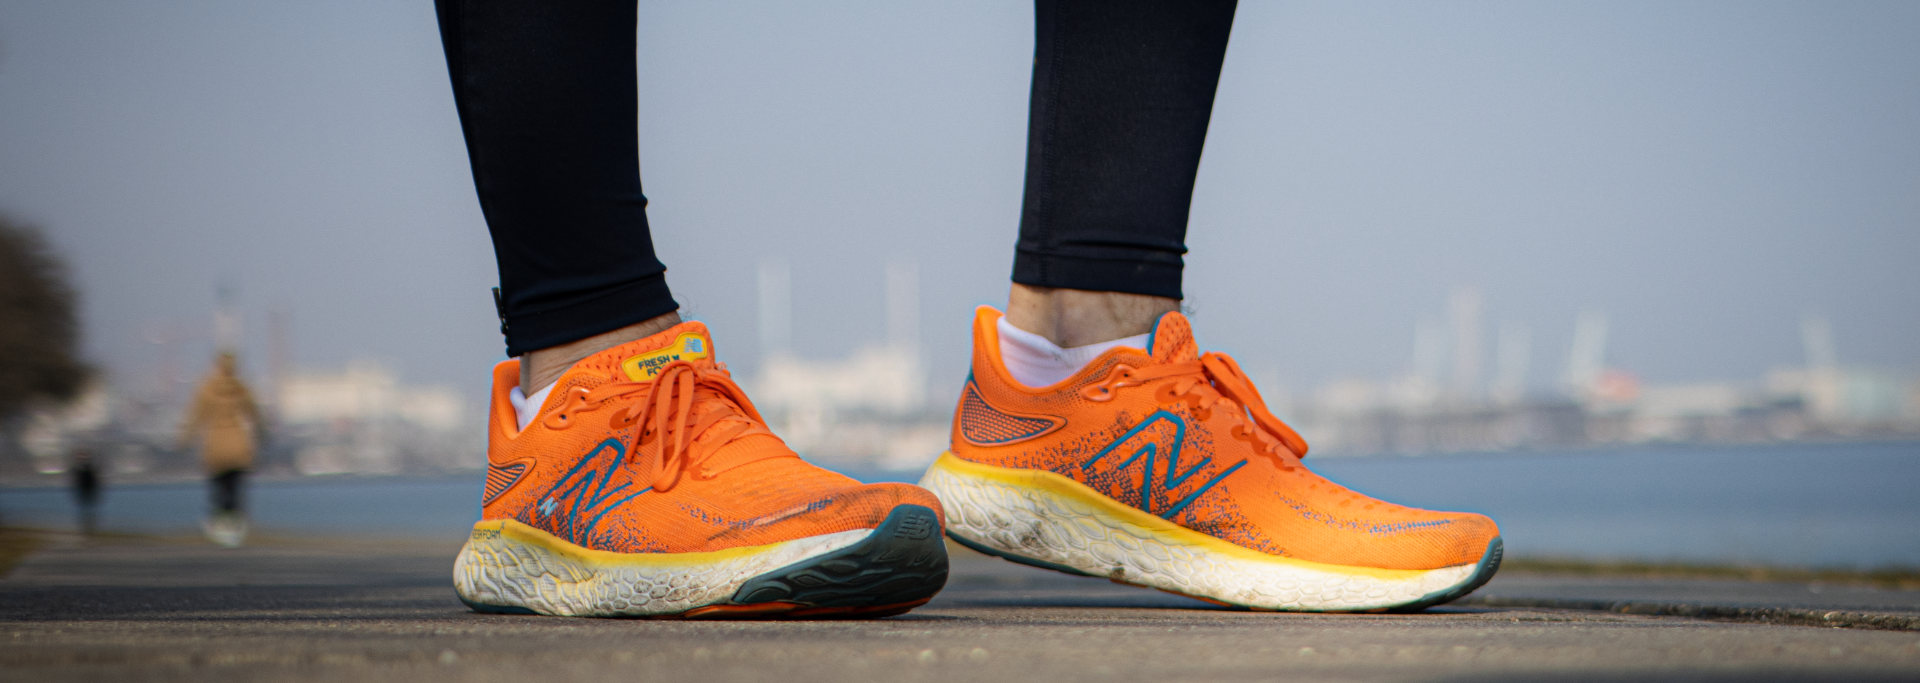 REVIEW: New Balance v12 - watch the test [VIDEO] -